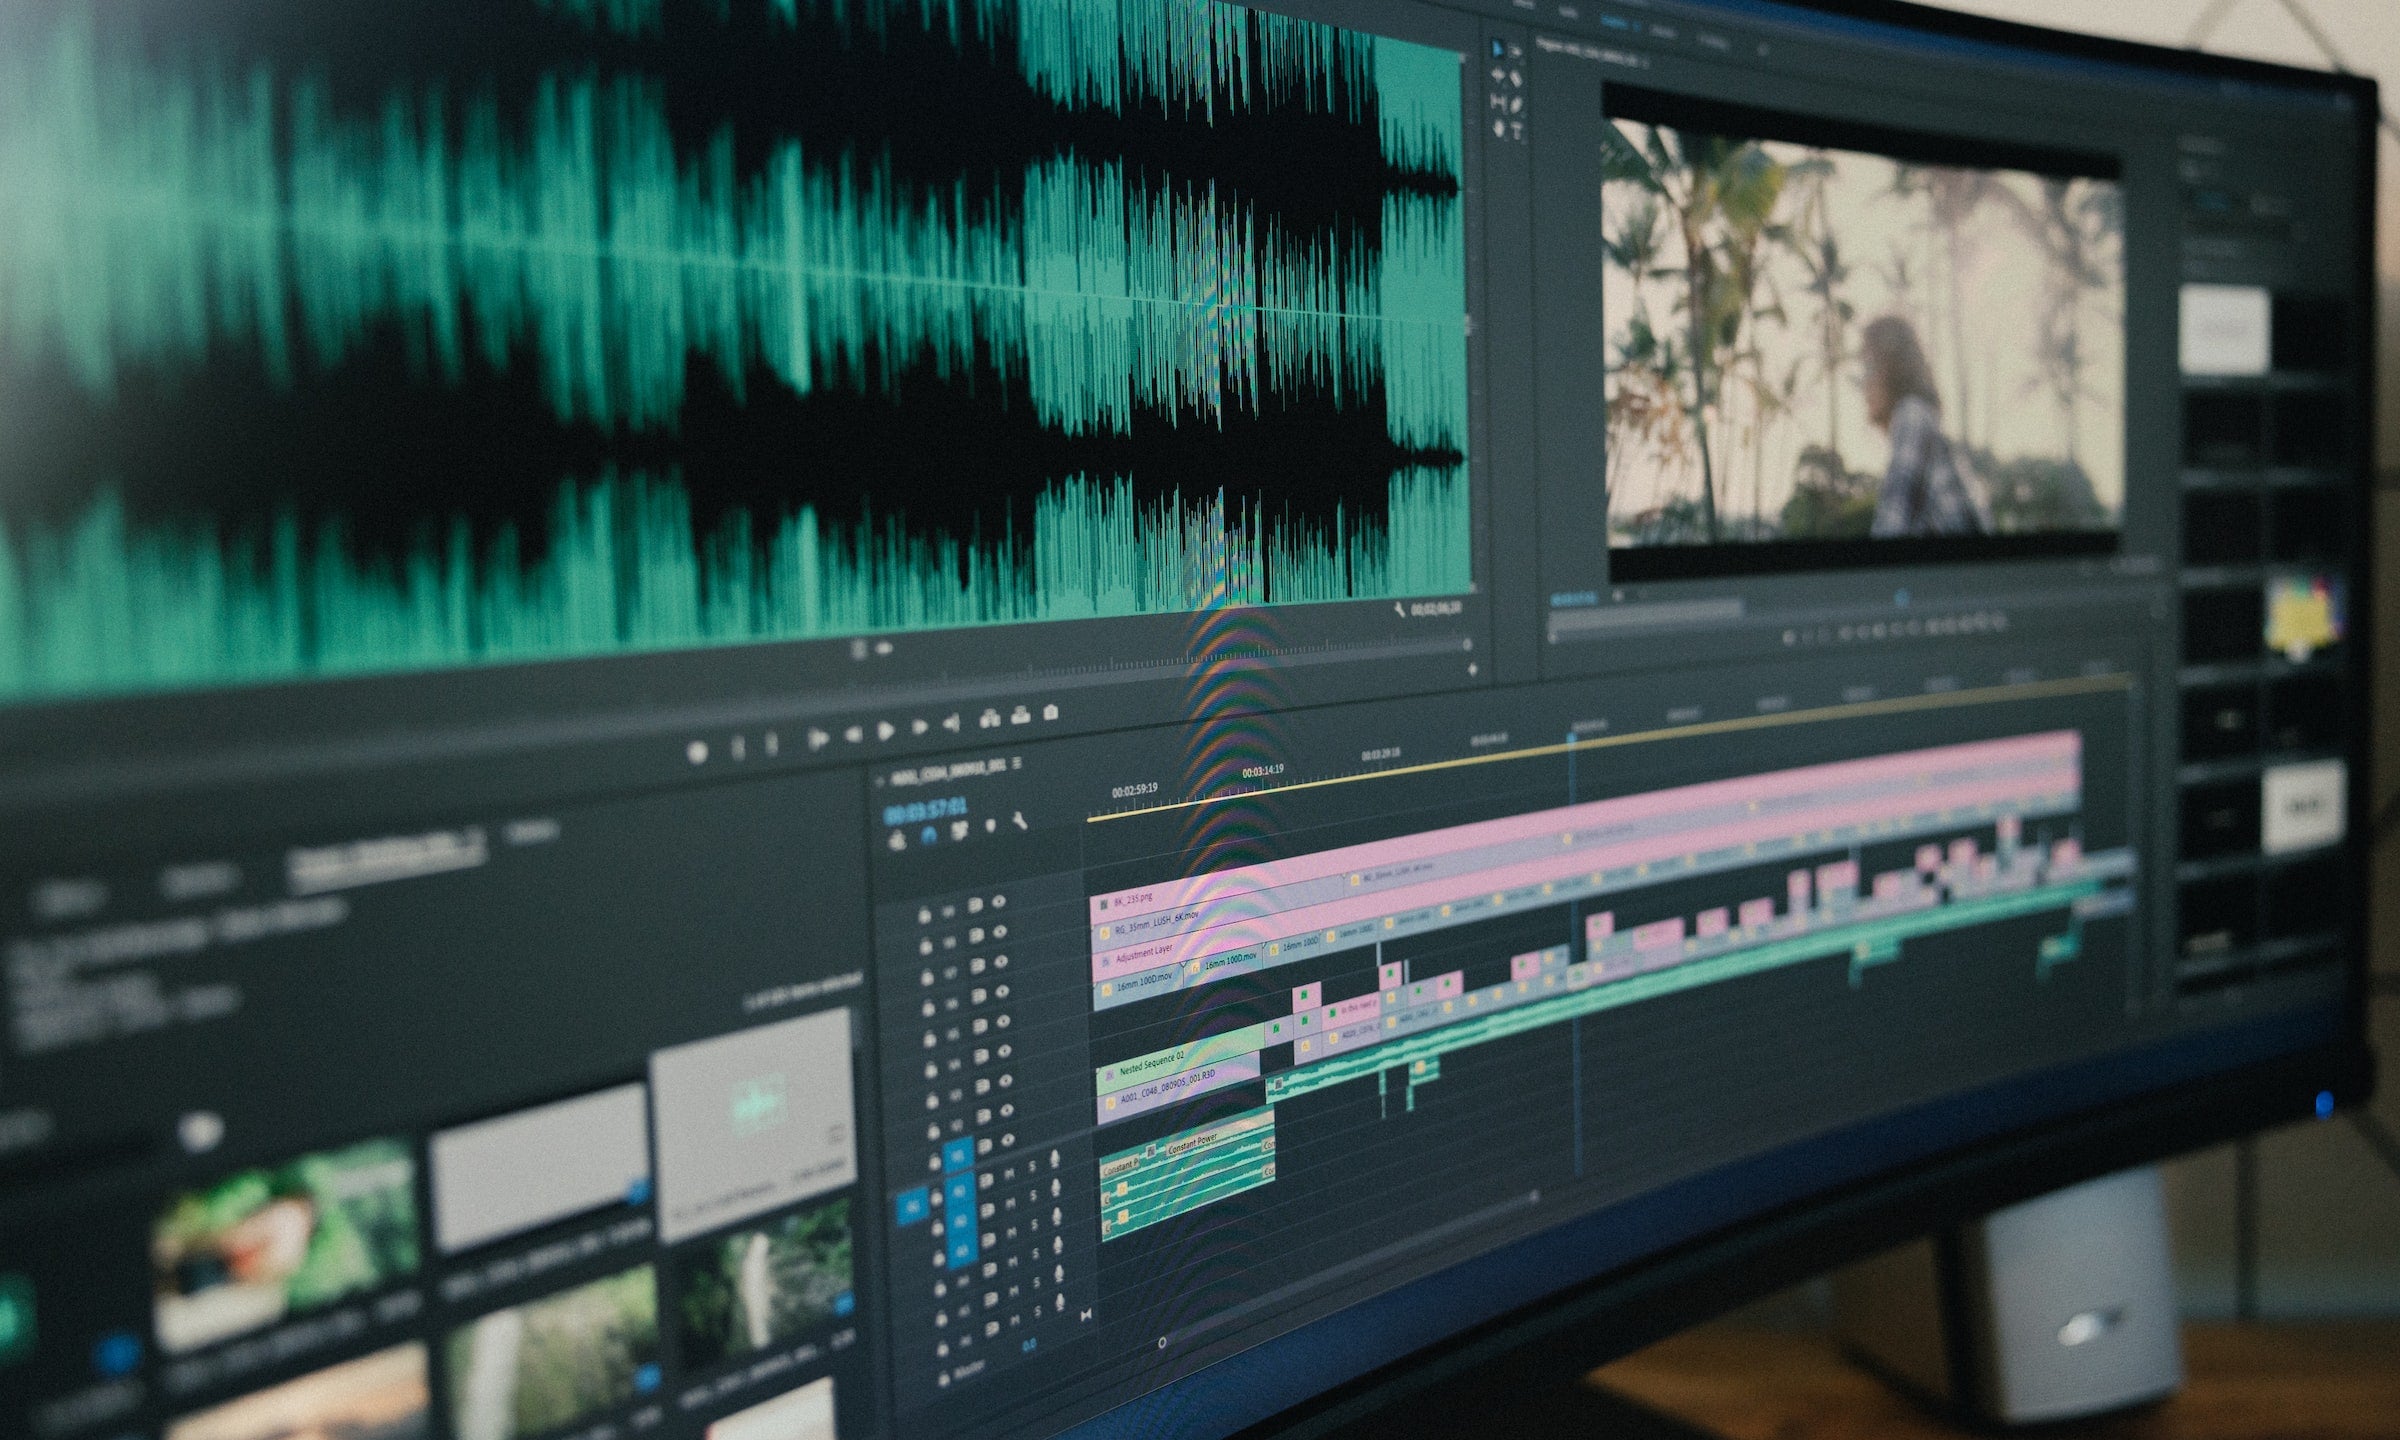 Mastering for film and video: How to prepare audio for sync to picture